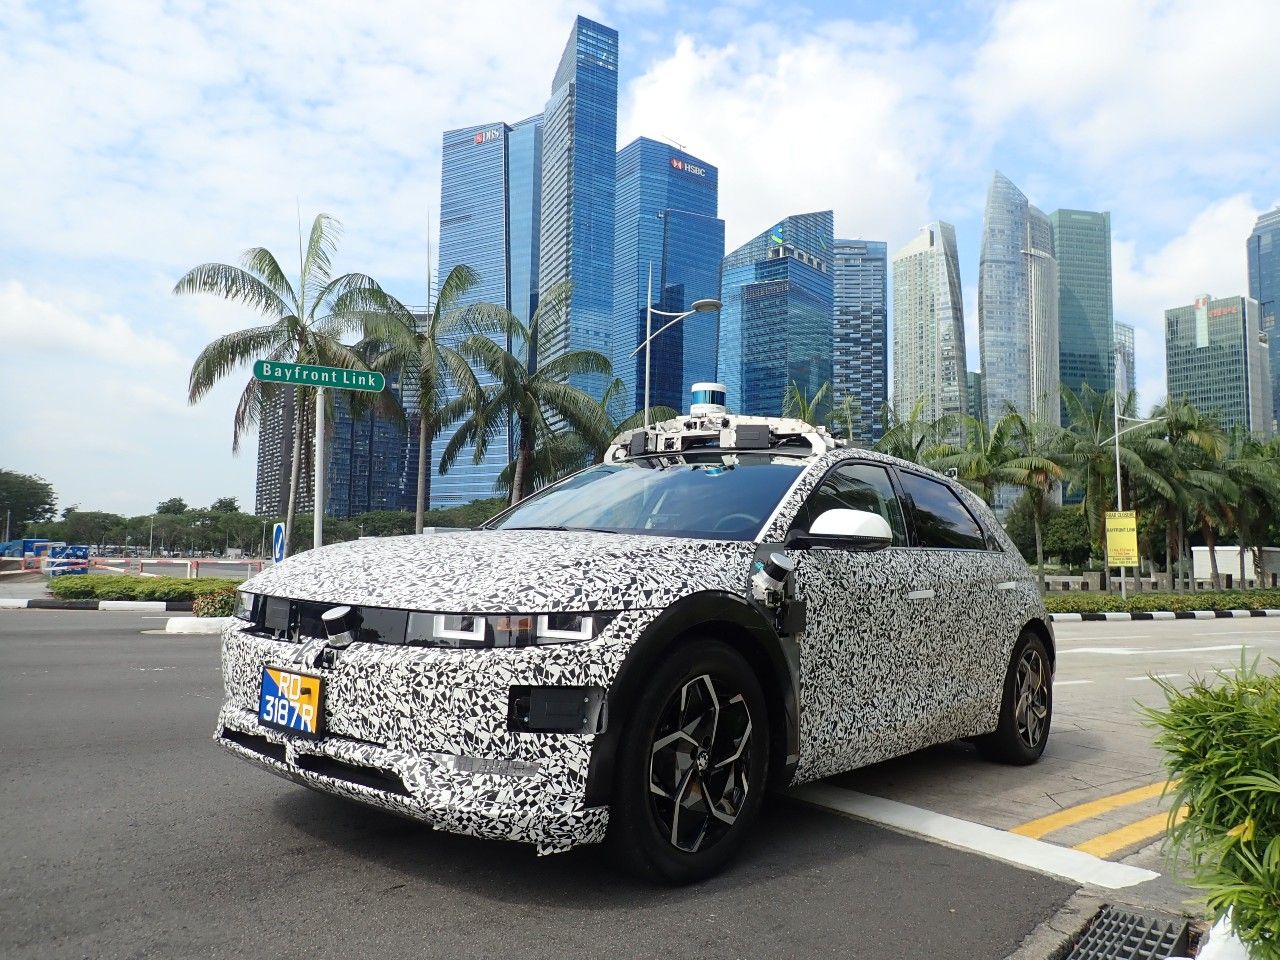 A Motional IONIQ 5 is shown driving with the downtown Singapore skyline in the background